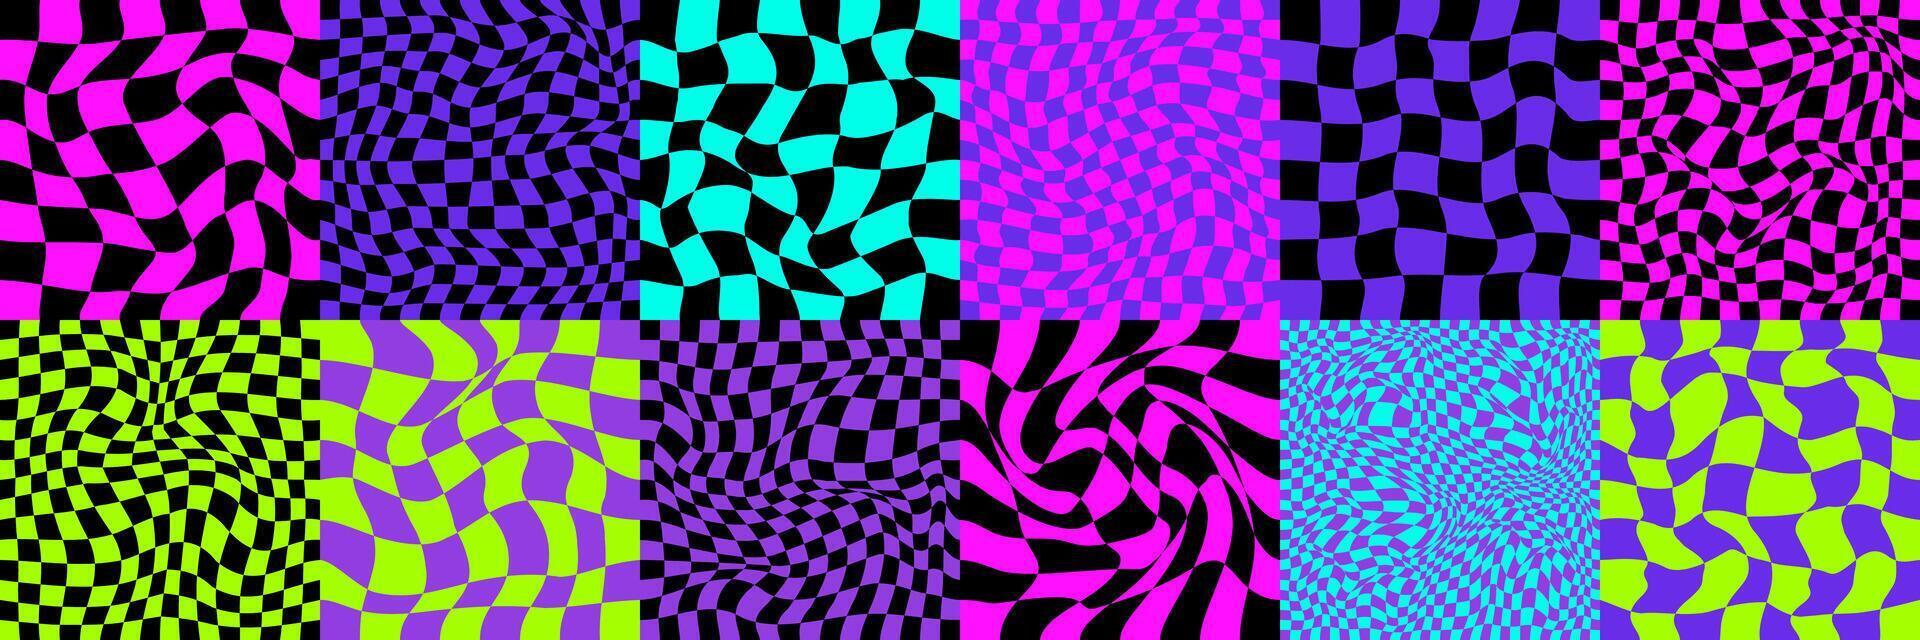 Checkerboard psychedelic pattern set black and white. Checkerboard background y2k retro grid. Psychedelic texture vector illustration.